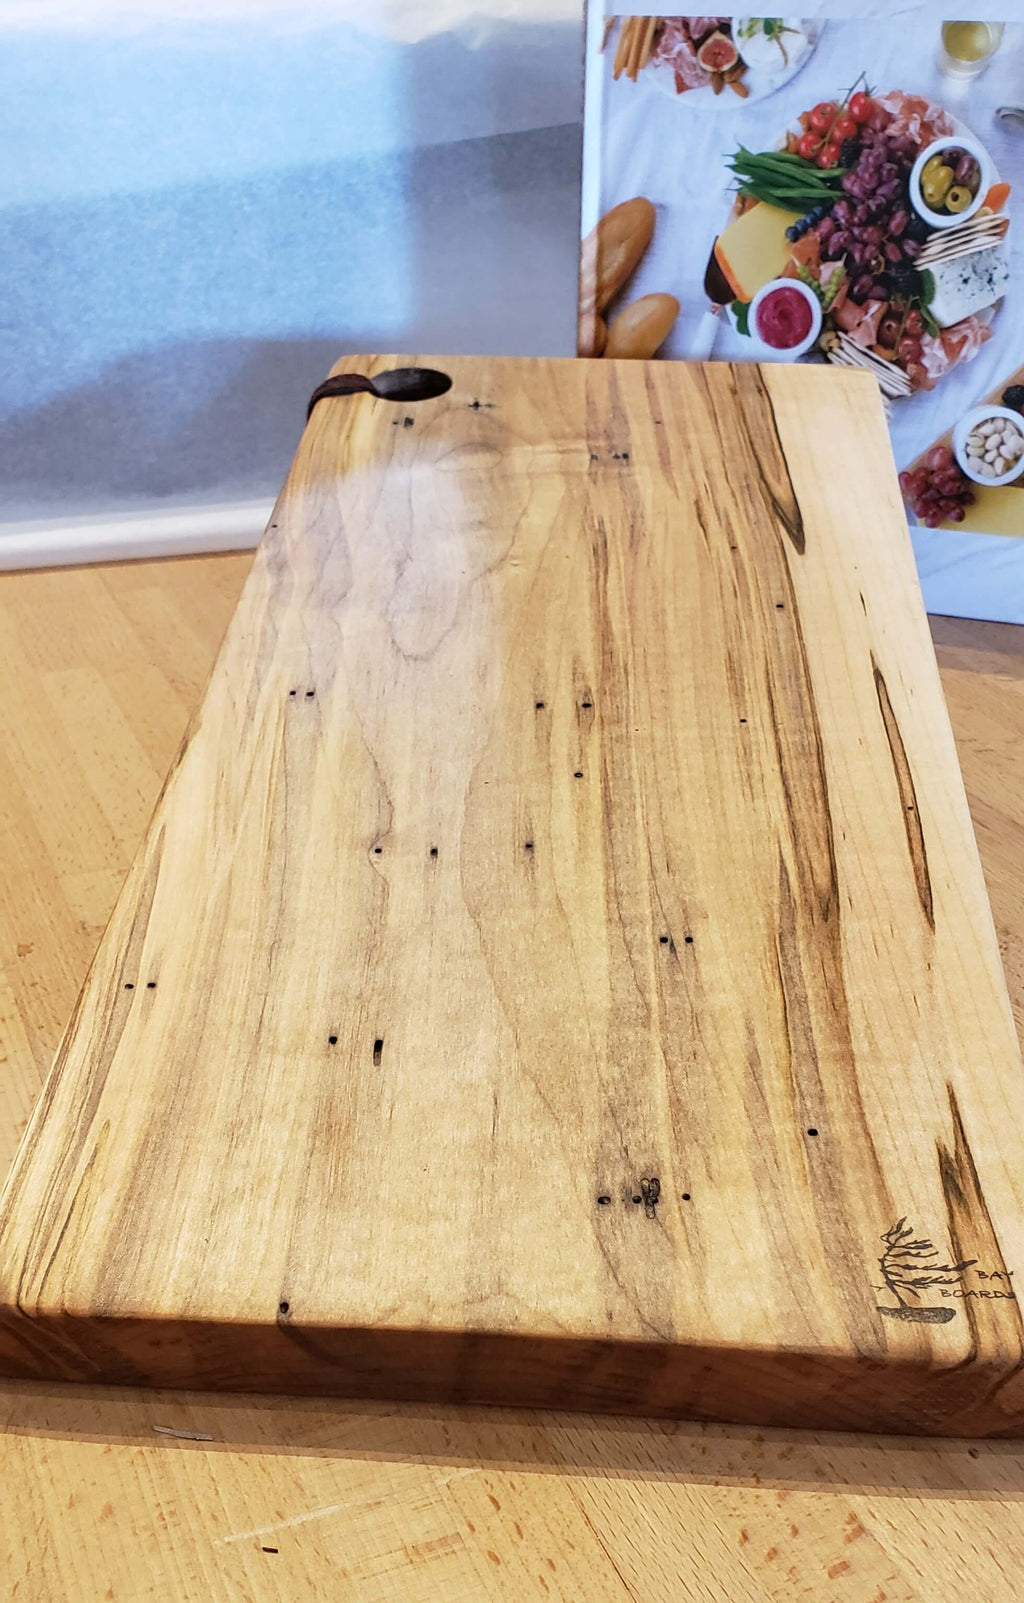 Maple Hand Crafted Cheese/Charcuterie Board